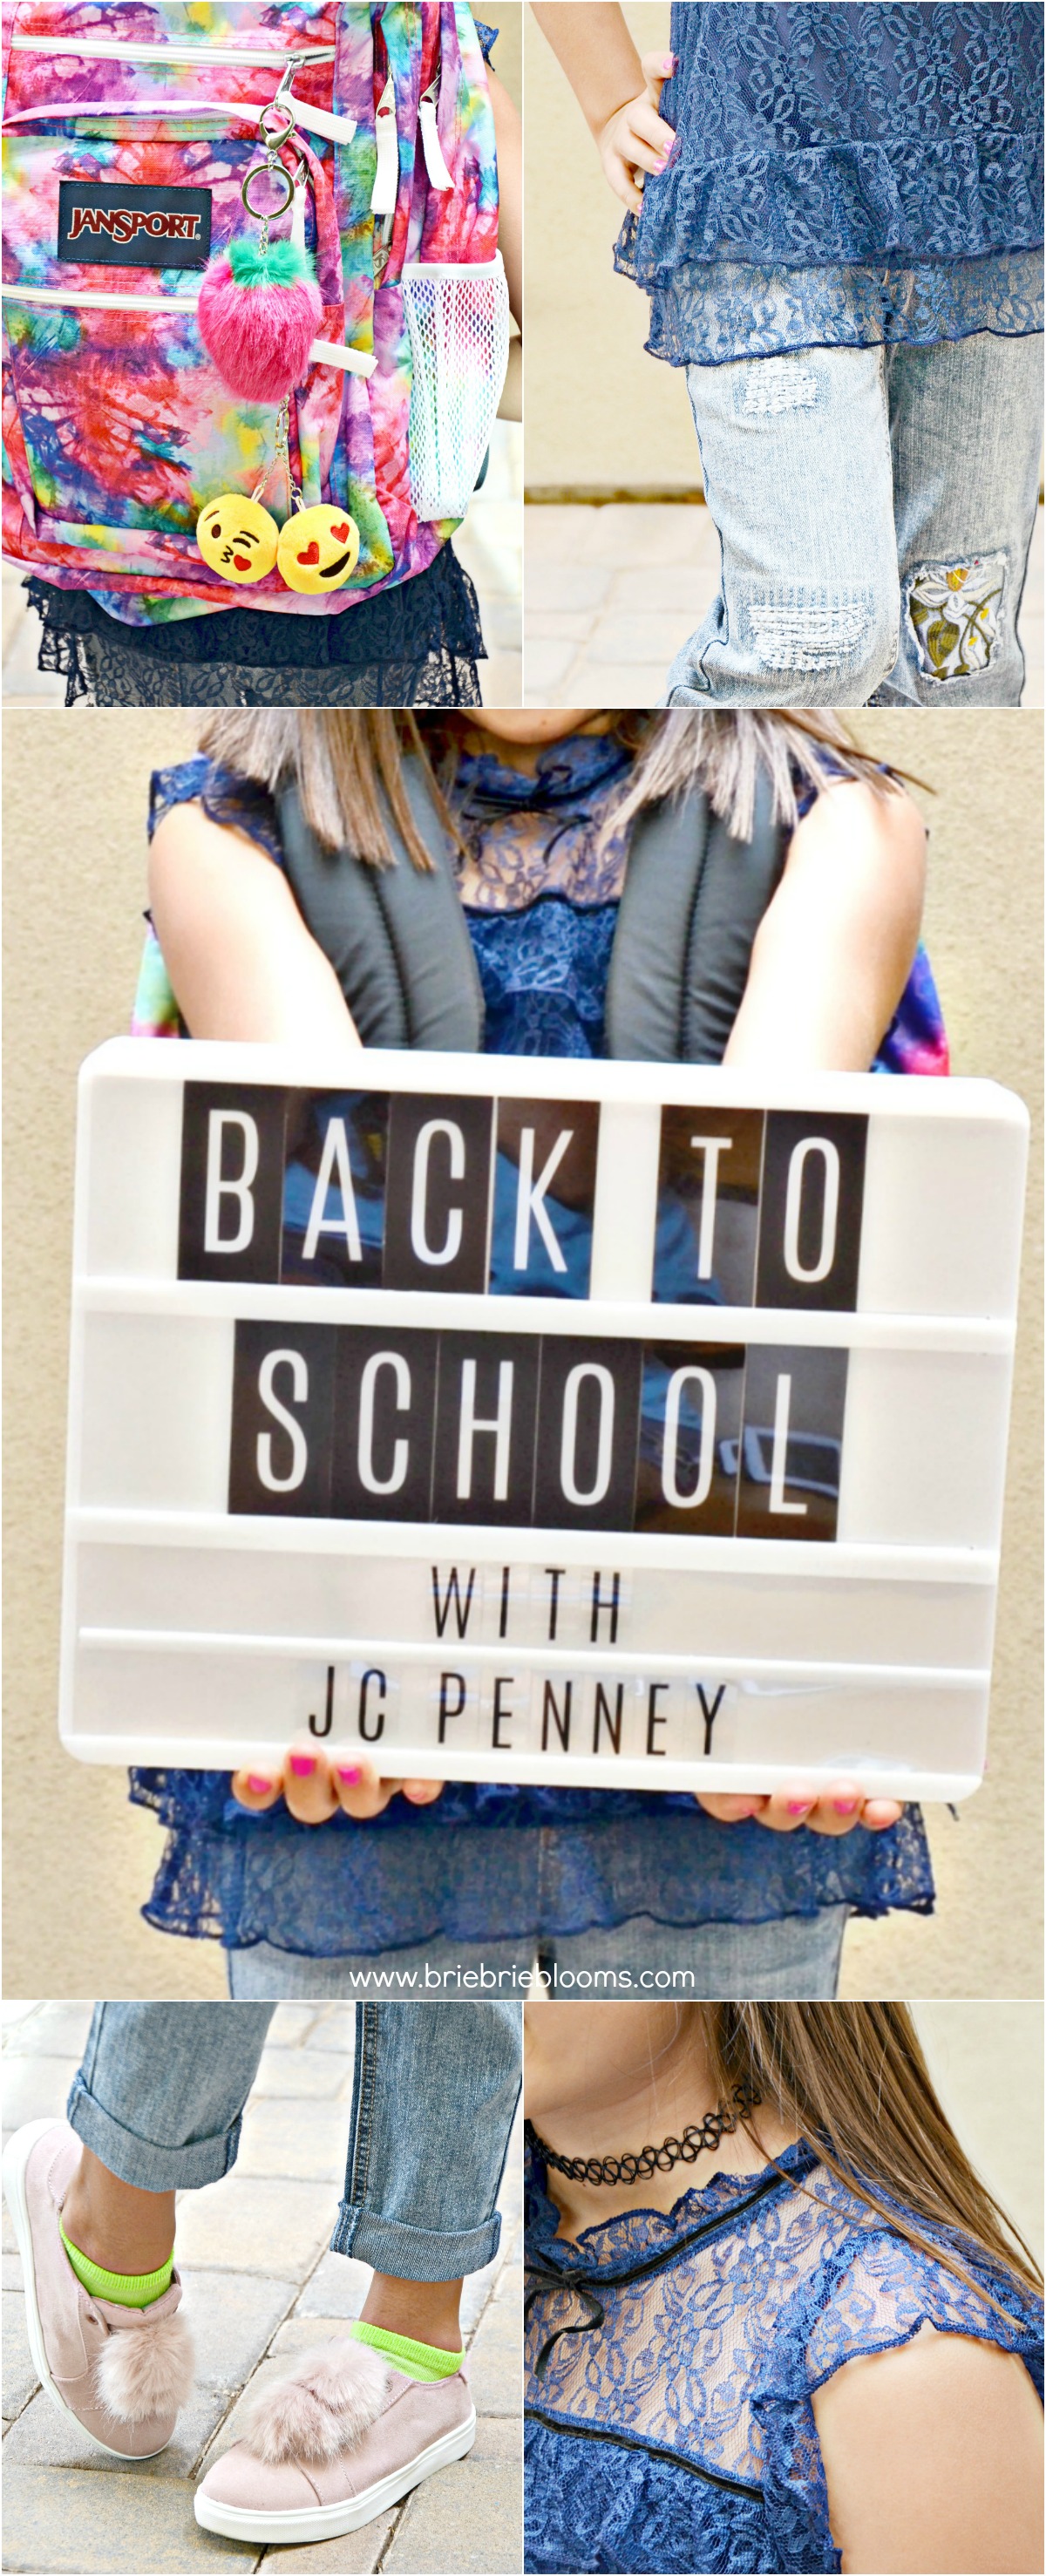 Make back to school shopping easy and find affordable back to school shopping trends like sequin flip tops and pom pom shoes at JCPenney.